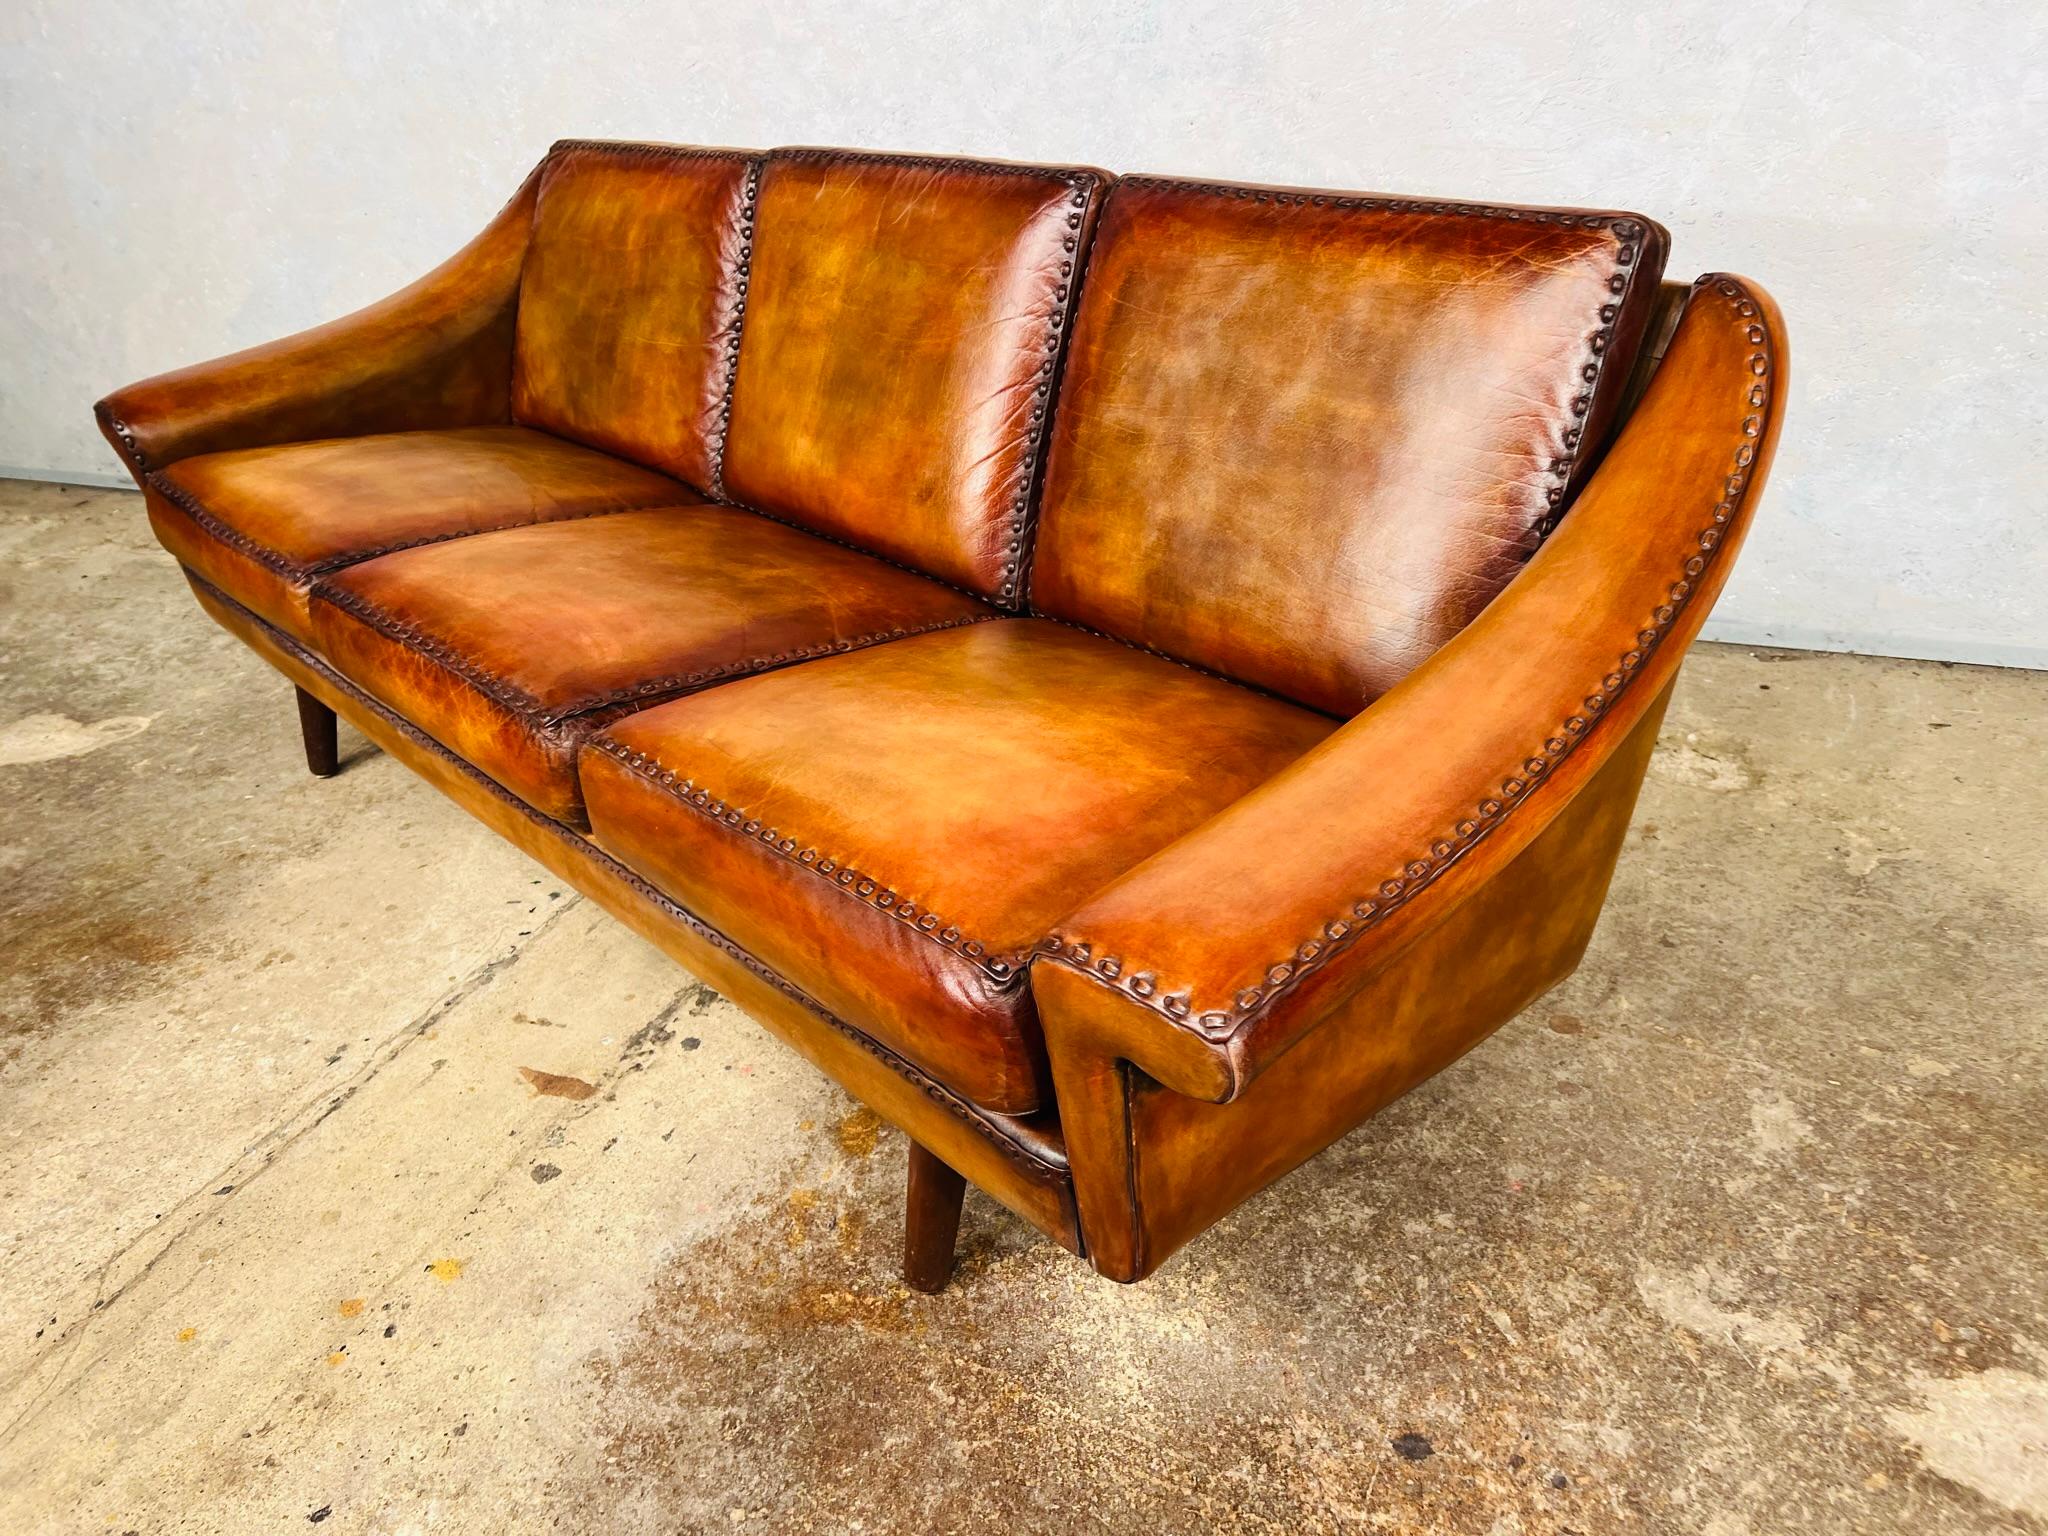 Matador Leather 3 Seater Sofa by Aage Christiansen for Eran 1960s #642 For Sale 3